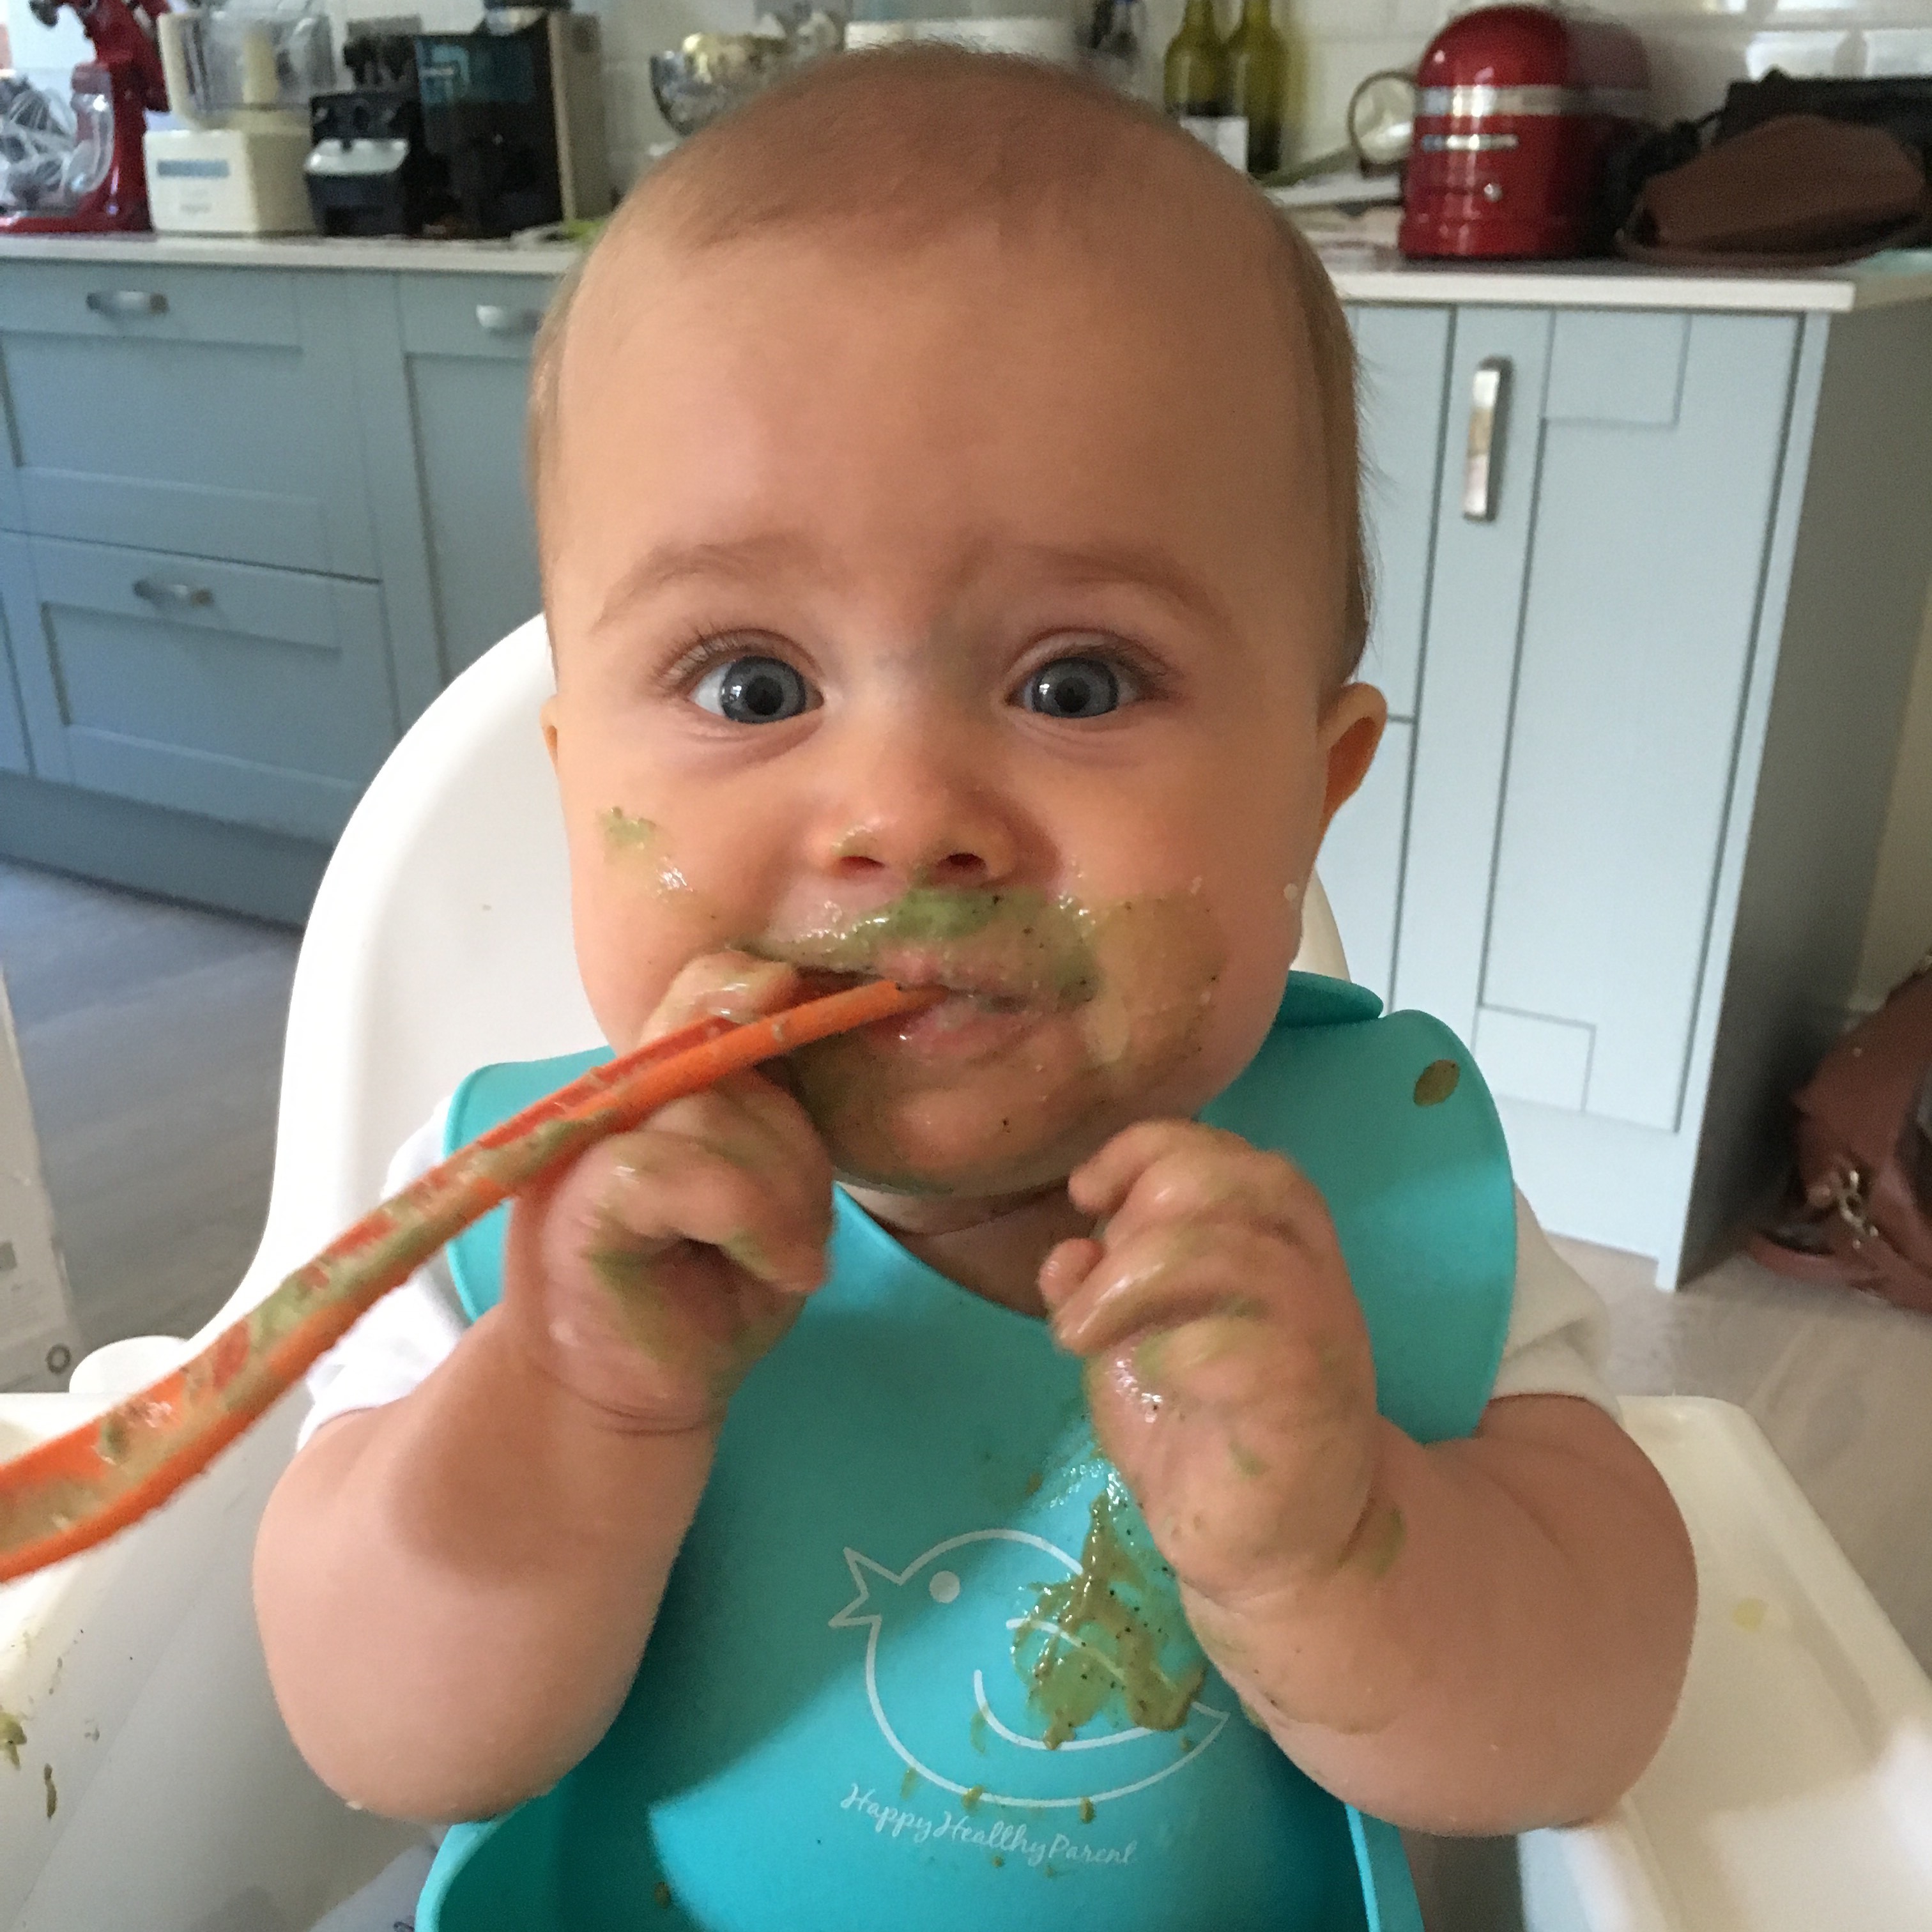 Ultimate Grocery Shopping List For Baby-led Weaning And Toddler Eating -  Feeding Tiny Bellies